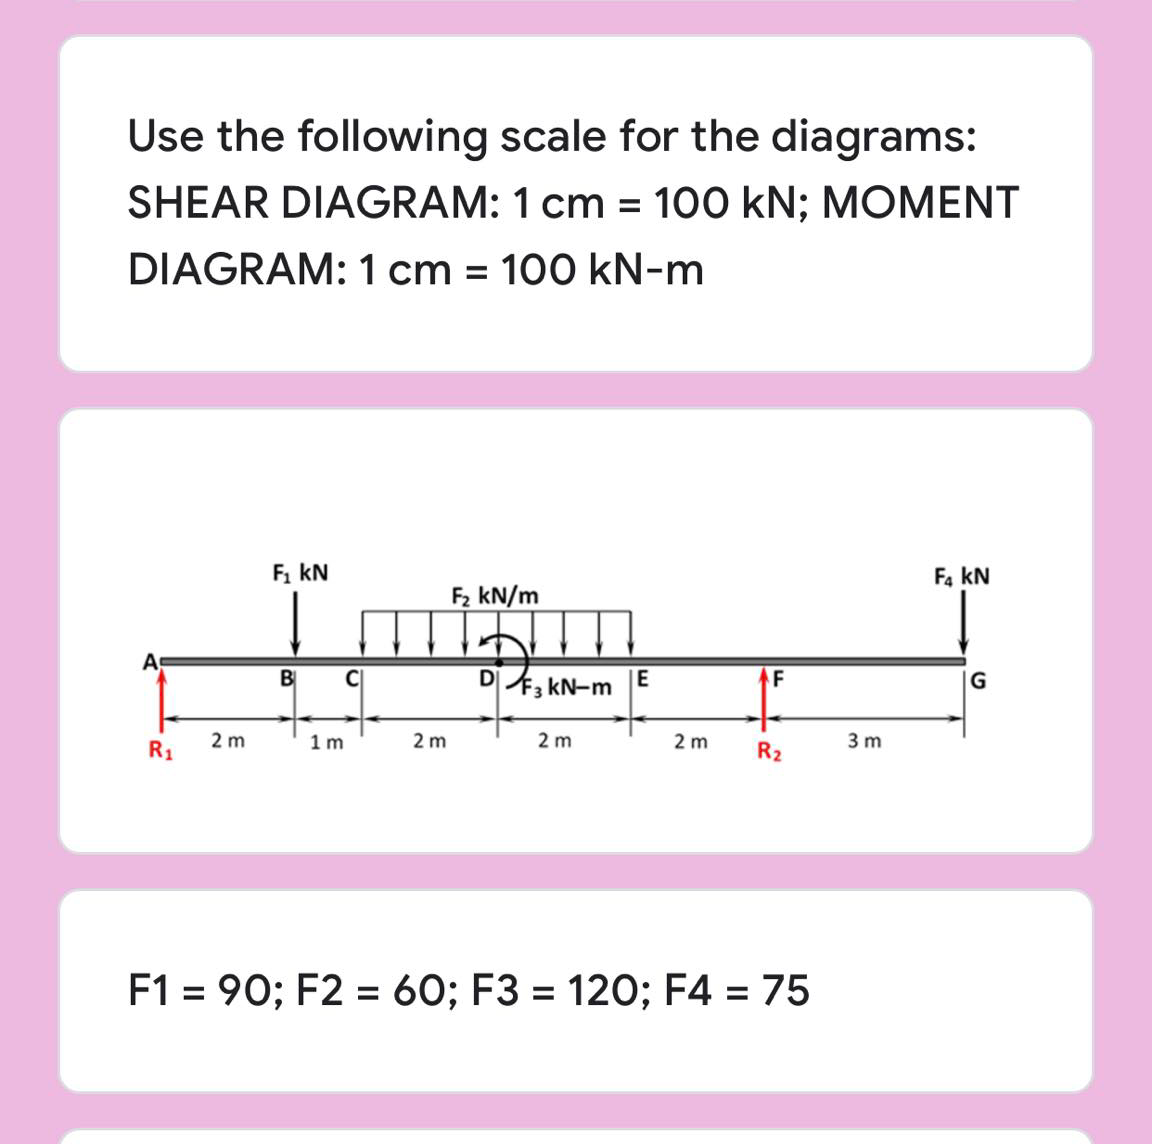 Use the following scale for the diagrams:
SHEAR DIAGRAM: 1 cm = 100 kN; MOMENT
DIAGRAM: 1 cm = 100 kN-m
F1 kN
Fa kN
F2 kN/m
A
BỊ
D3 kN-m
E
AF
R1
2 m
1 m
2 m
2 m
2 m
R2
3 m
F1 = 90; F2 = 60; F3 = 120; F4 = 75
%3D
